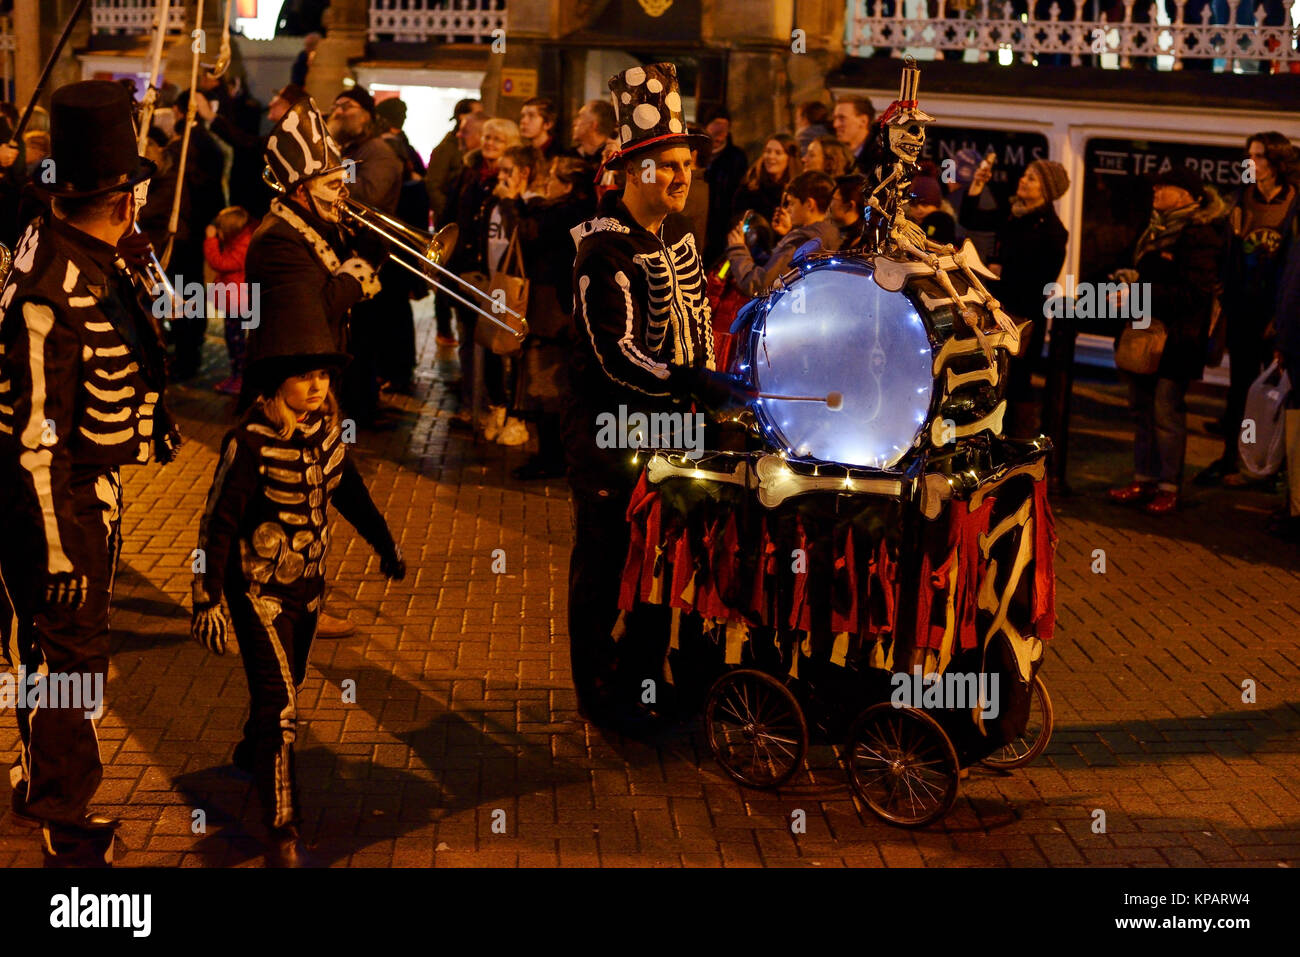 Chester, UK. 14th December 2017. Performers take part in the annual Winter Watch parade through the city centre. The parade involves musicians, street theatre and costume performances with characters including angels, devils, skeletons and dragons. Credit: Andrew Paterson/Alamy Live News Stock Photo